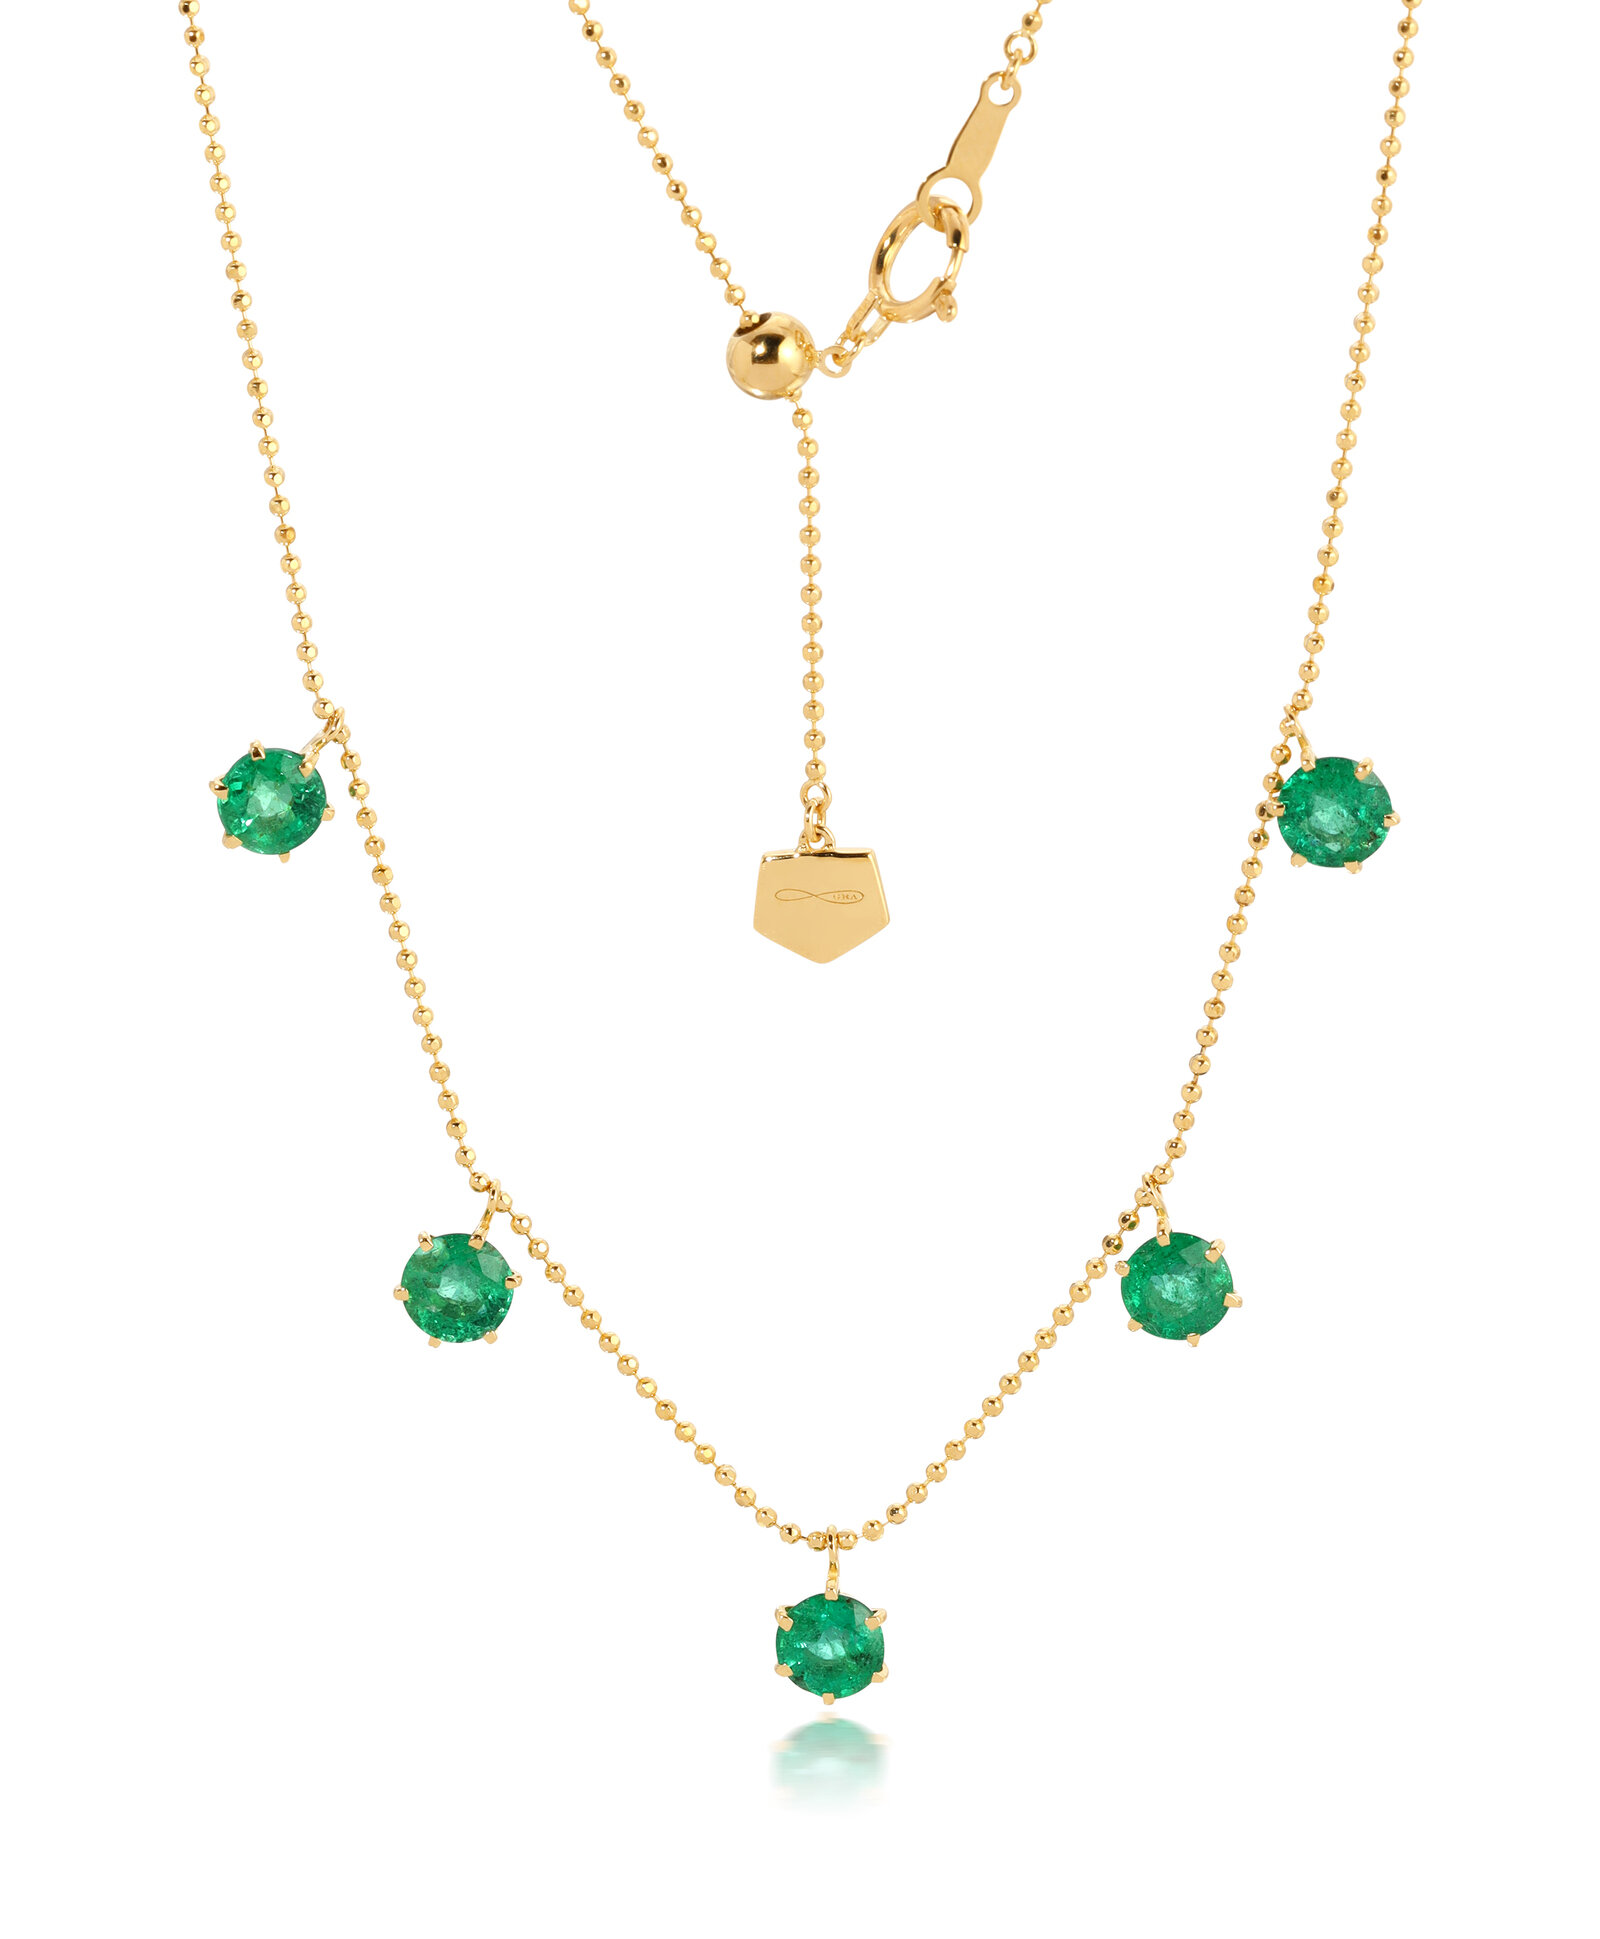 3.5ct Emerald Floating Necklace